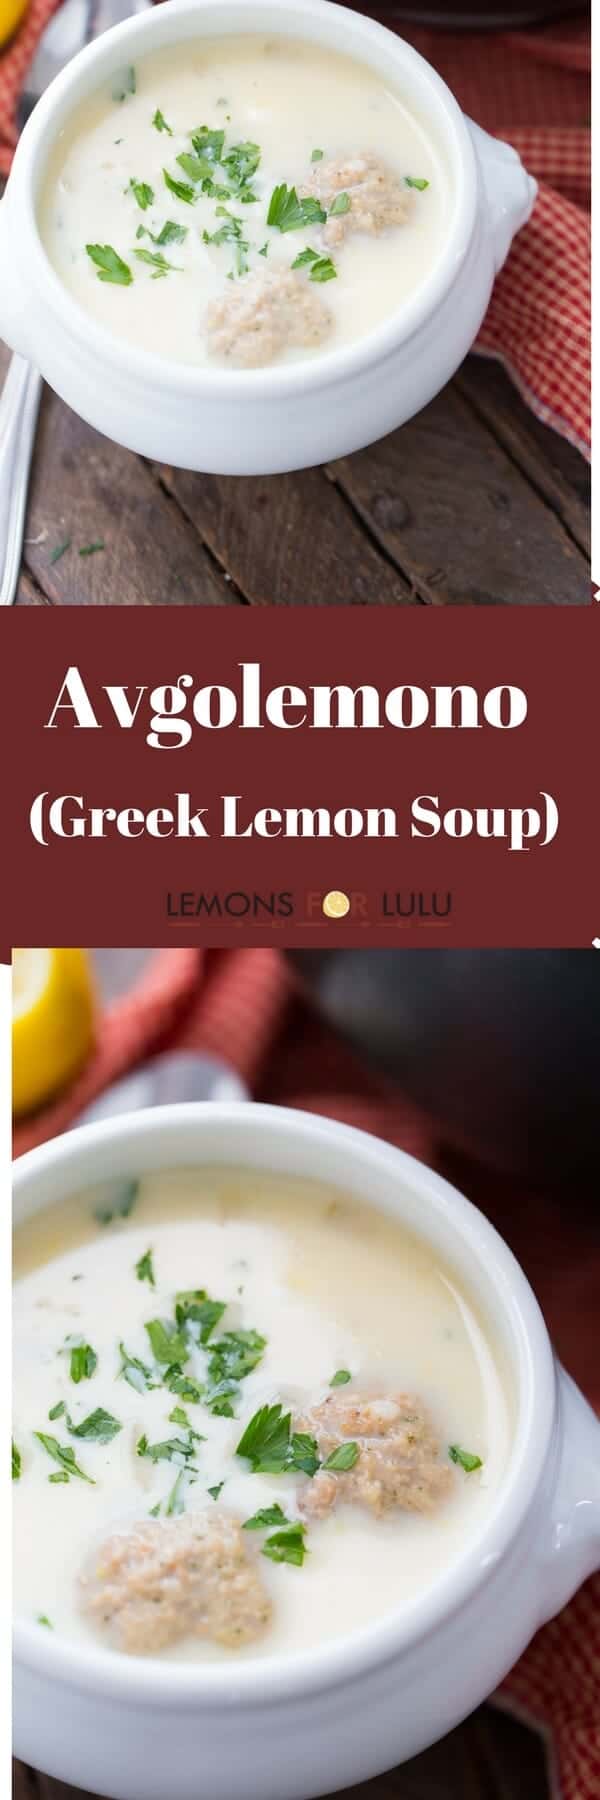 Avgolemono is pure comfort food. This Greek lemon soup recipe requires only a handful of ingredients yet is such a satisfying and comforting meal!